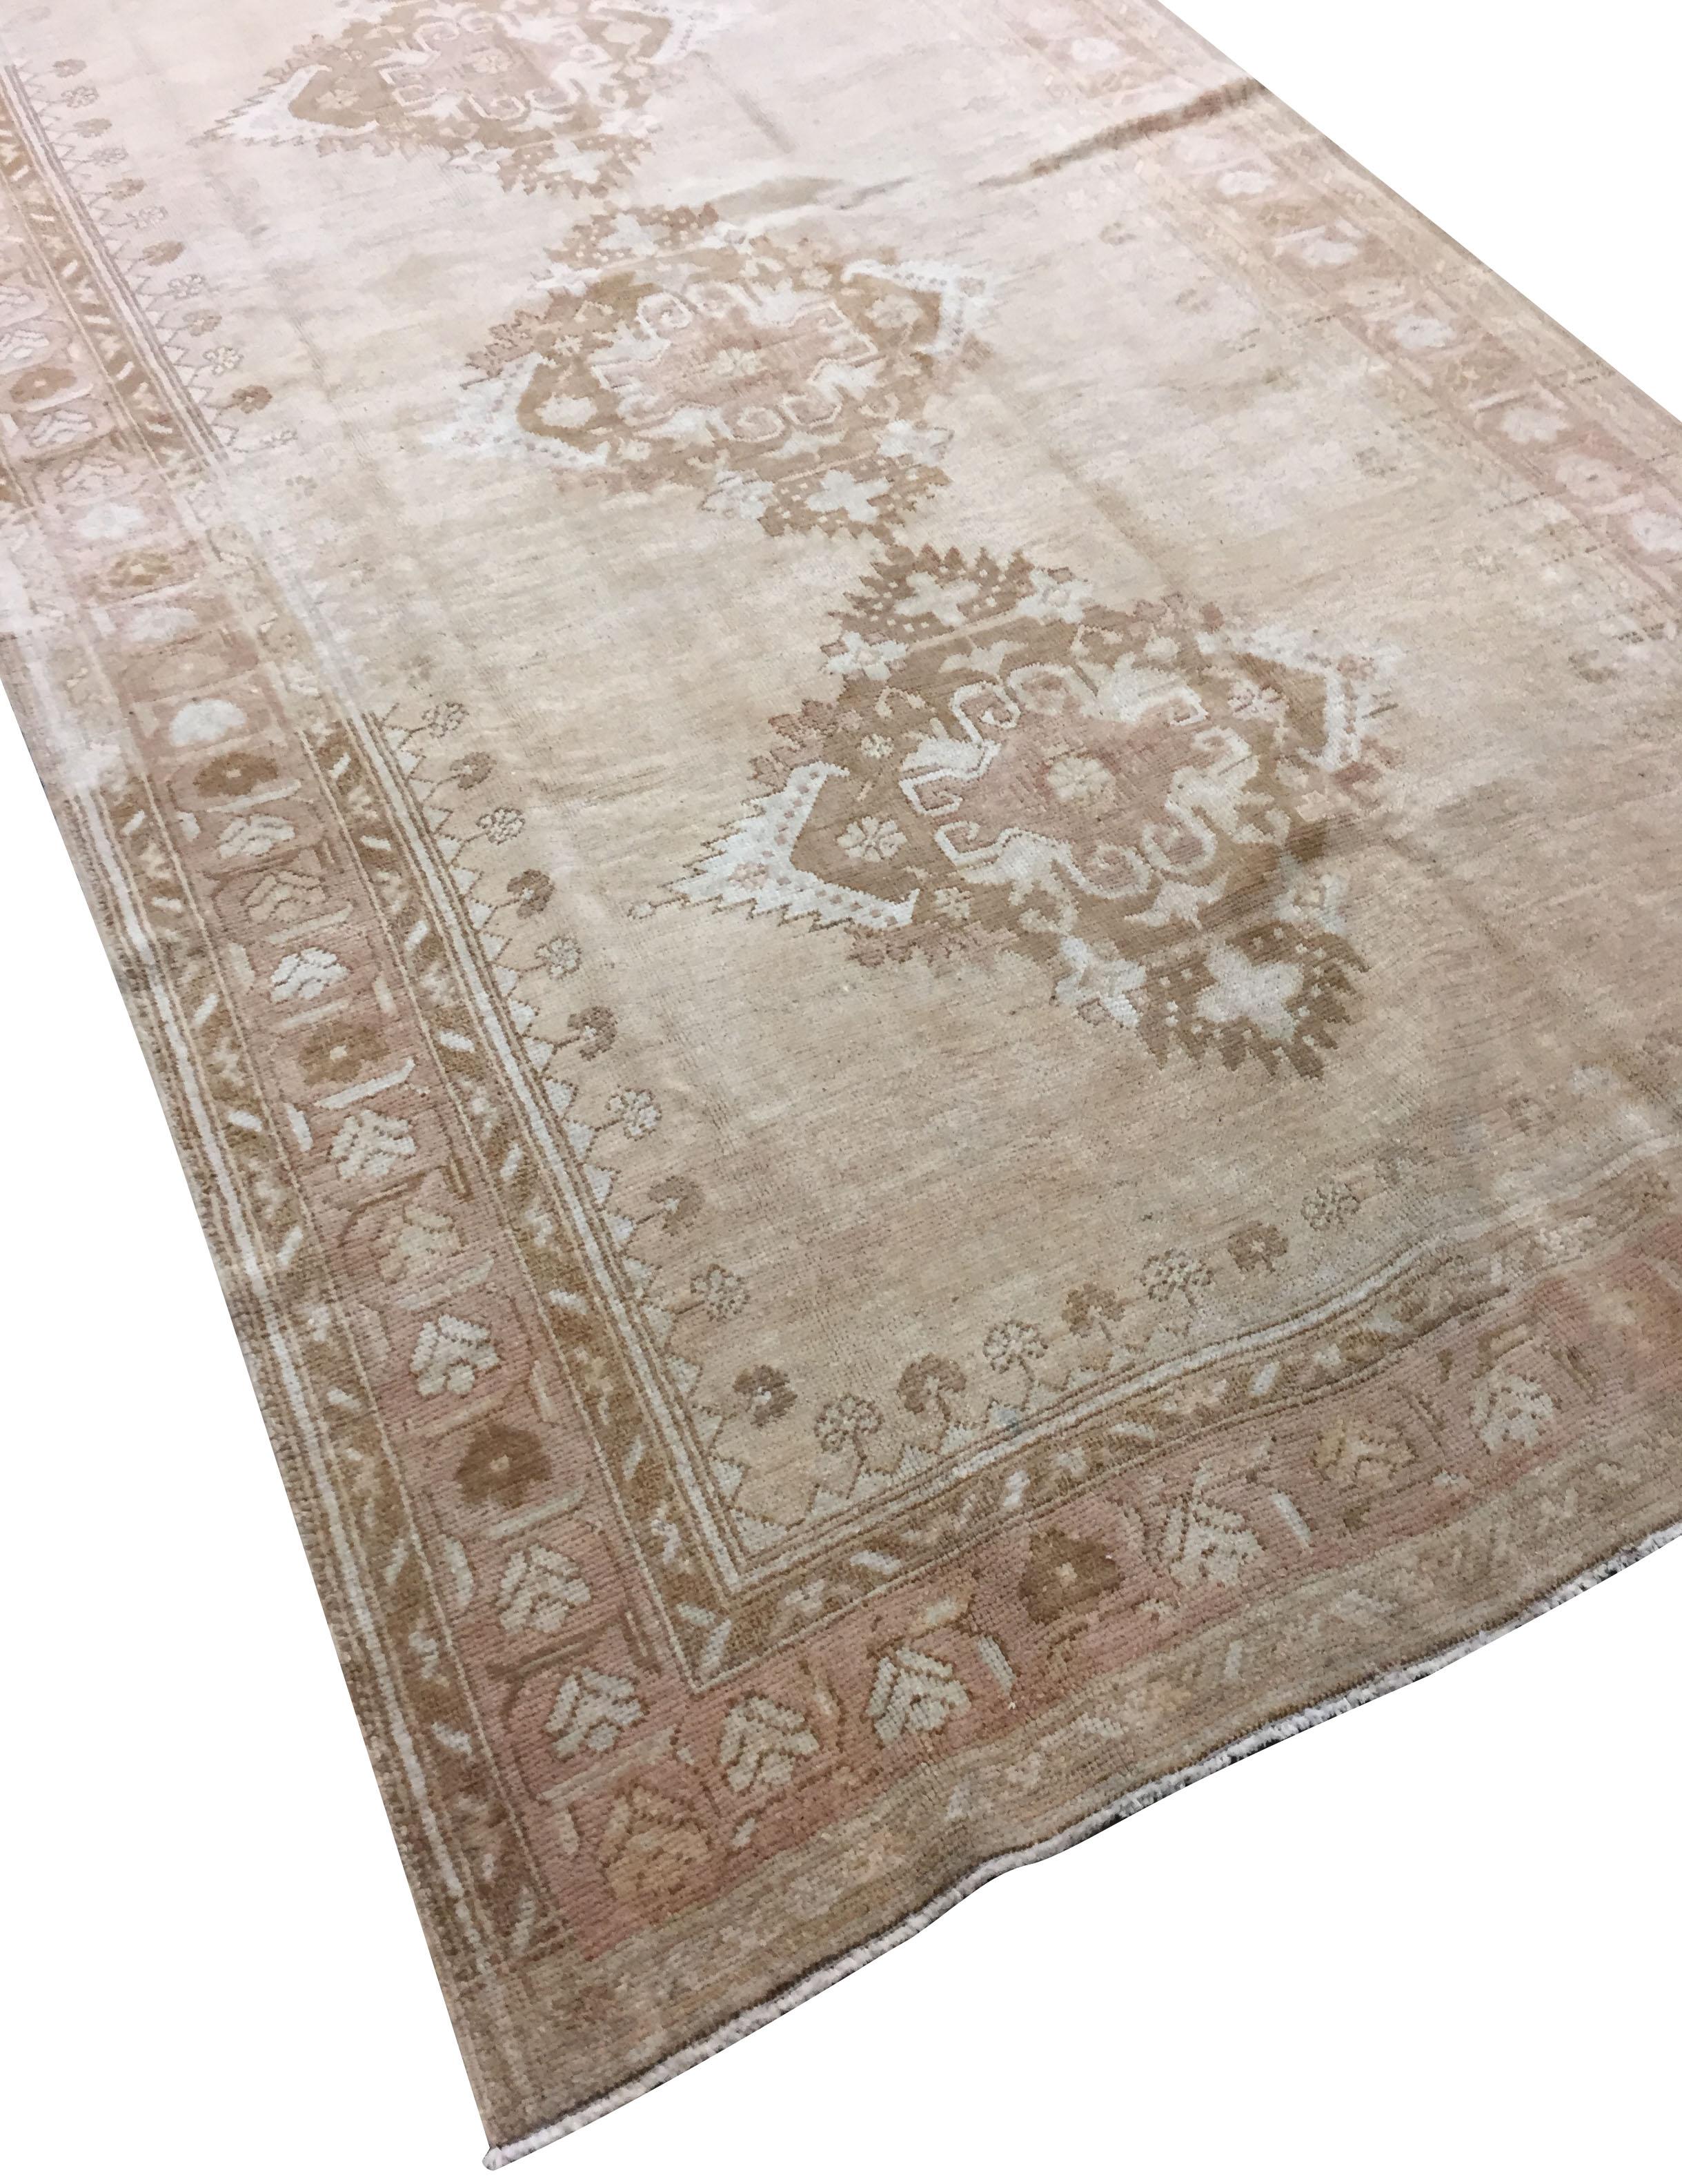 Vintage Turkish Oushak rug Runner 4'10 x 11'8. Hand-woven in Turkey where rug weaving is the culture rather than a business. Rugs from Turkey are known for the high quality of their wool their beautiful patterns and warm colors. These designer